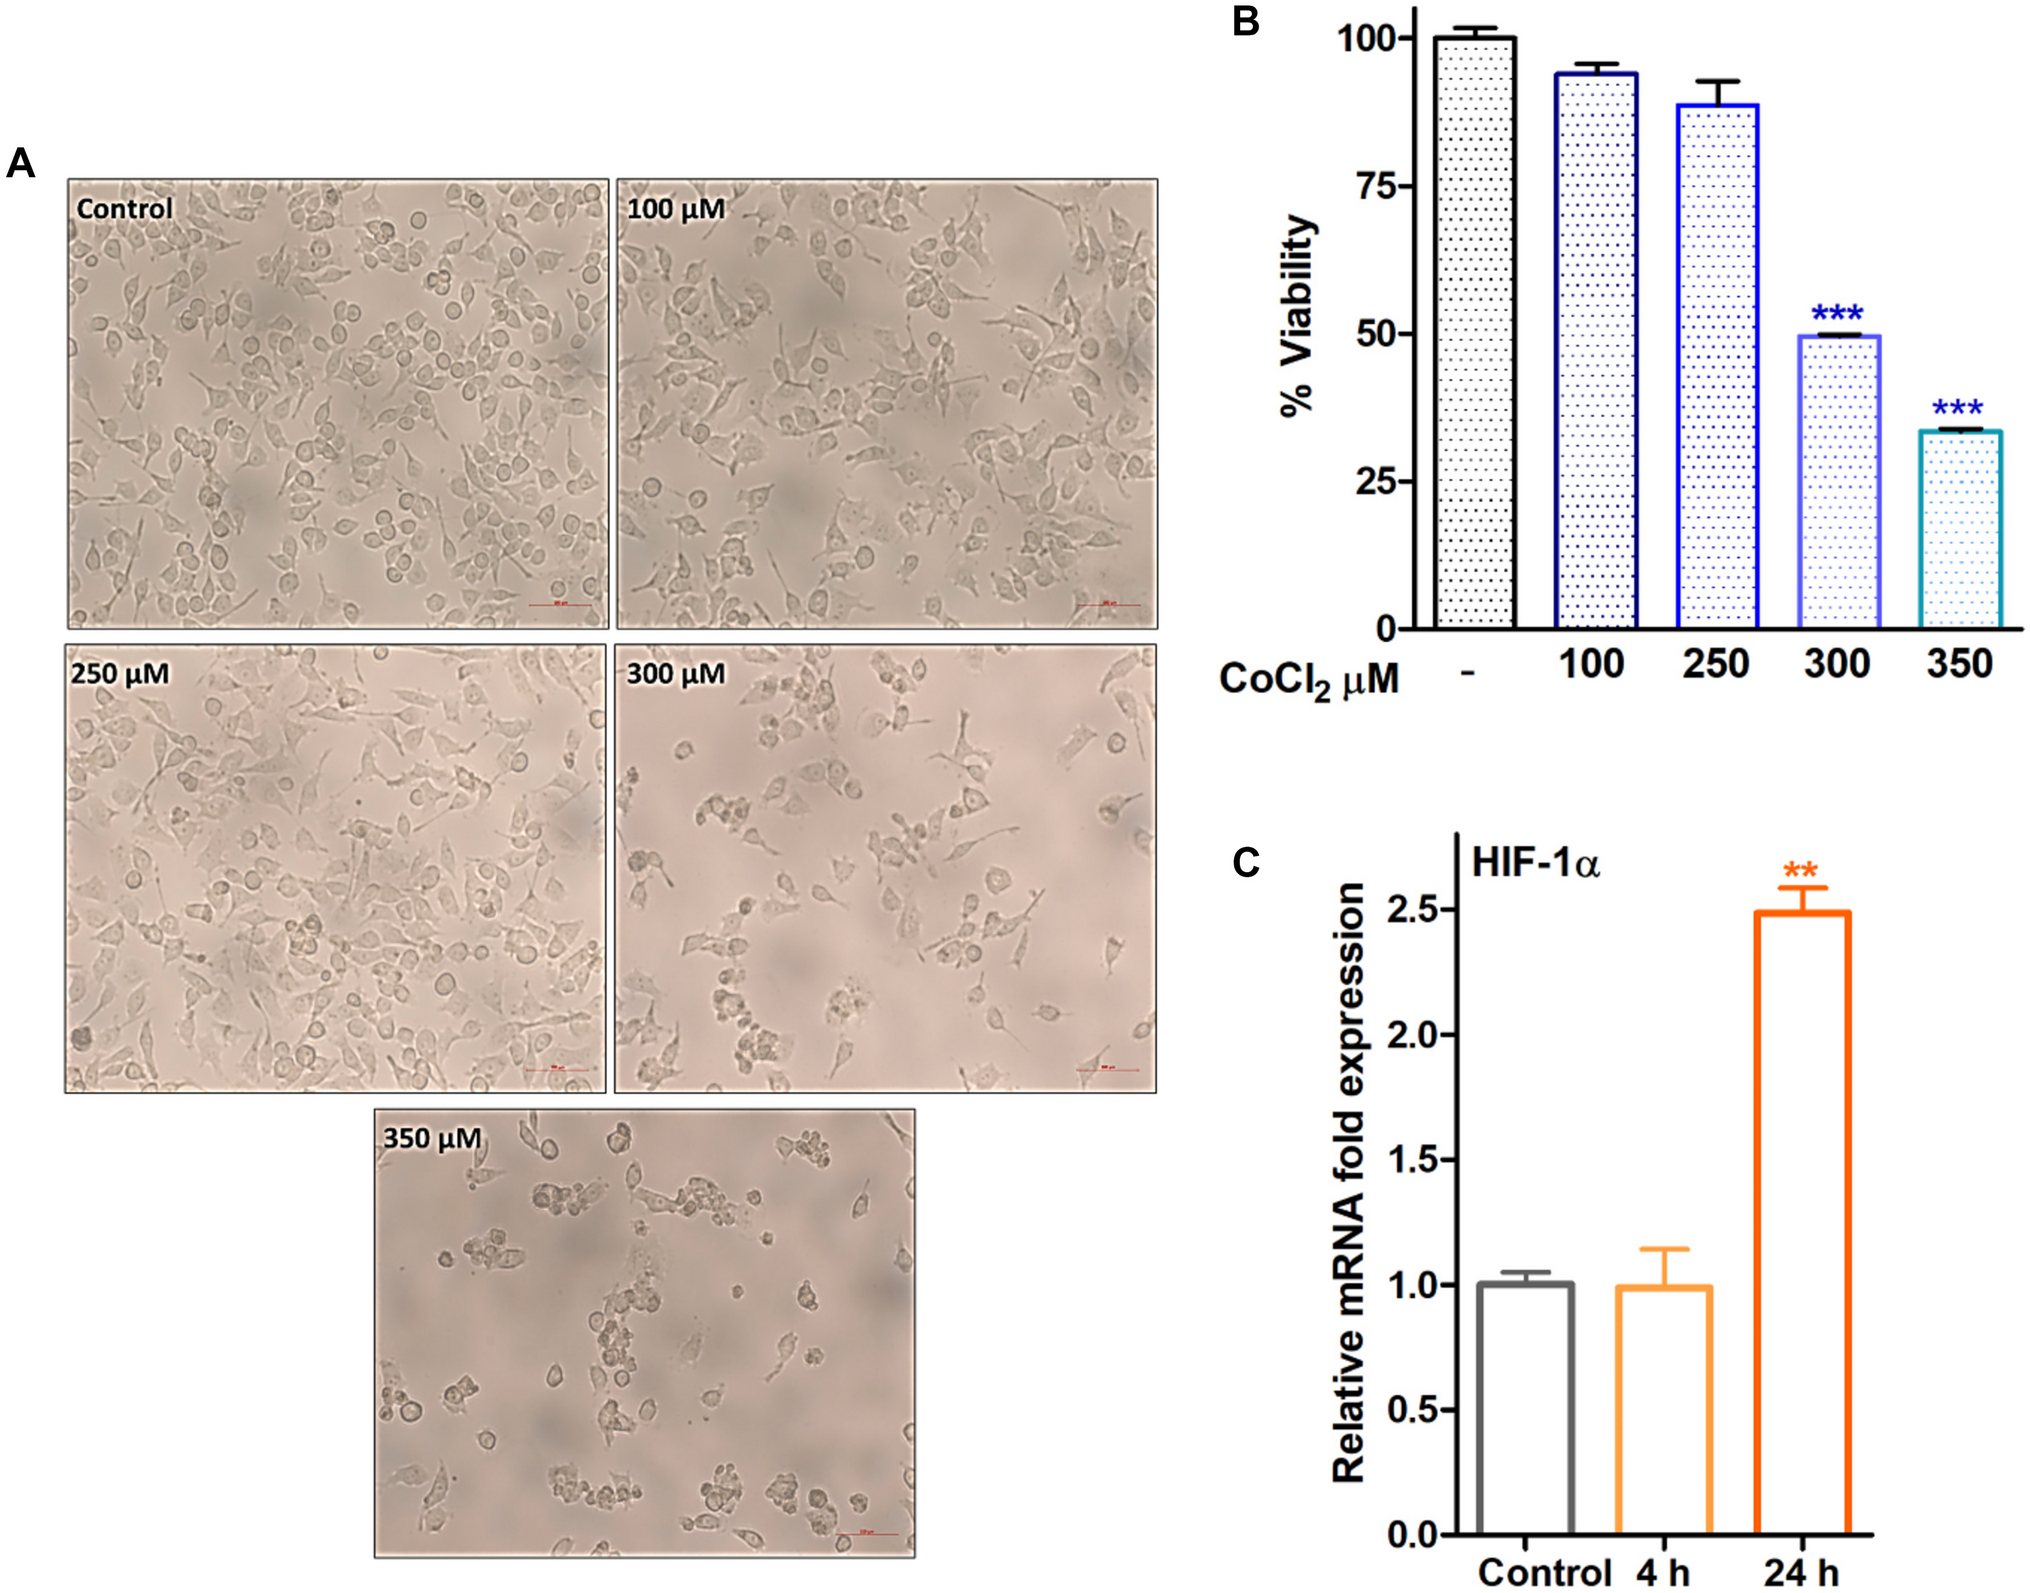 Regulation of genes involved in the metabolic adaptation of murine microglial cells in response to elevated HIF-1α mediated activation